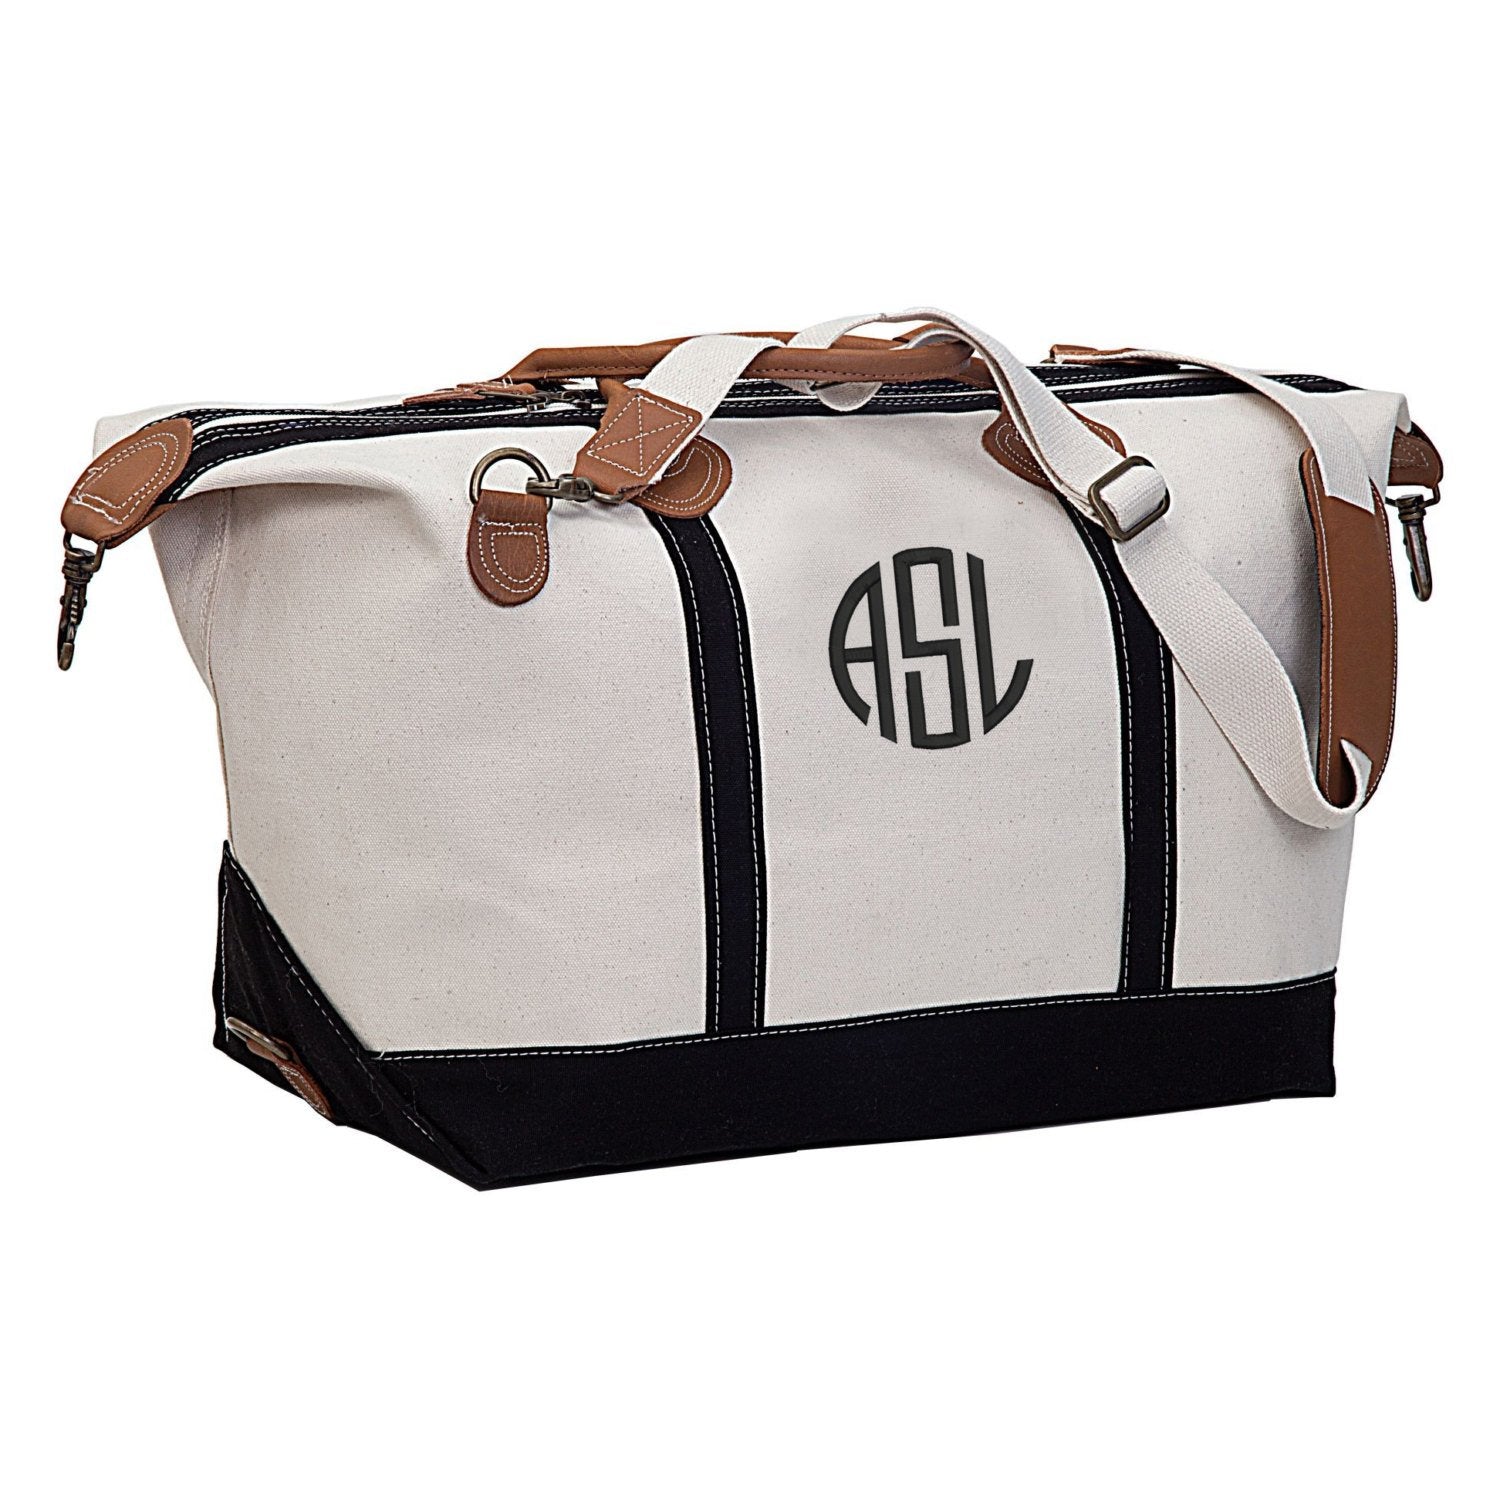 Travel in Style with the Belmont Personalized Cabin Bag